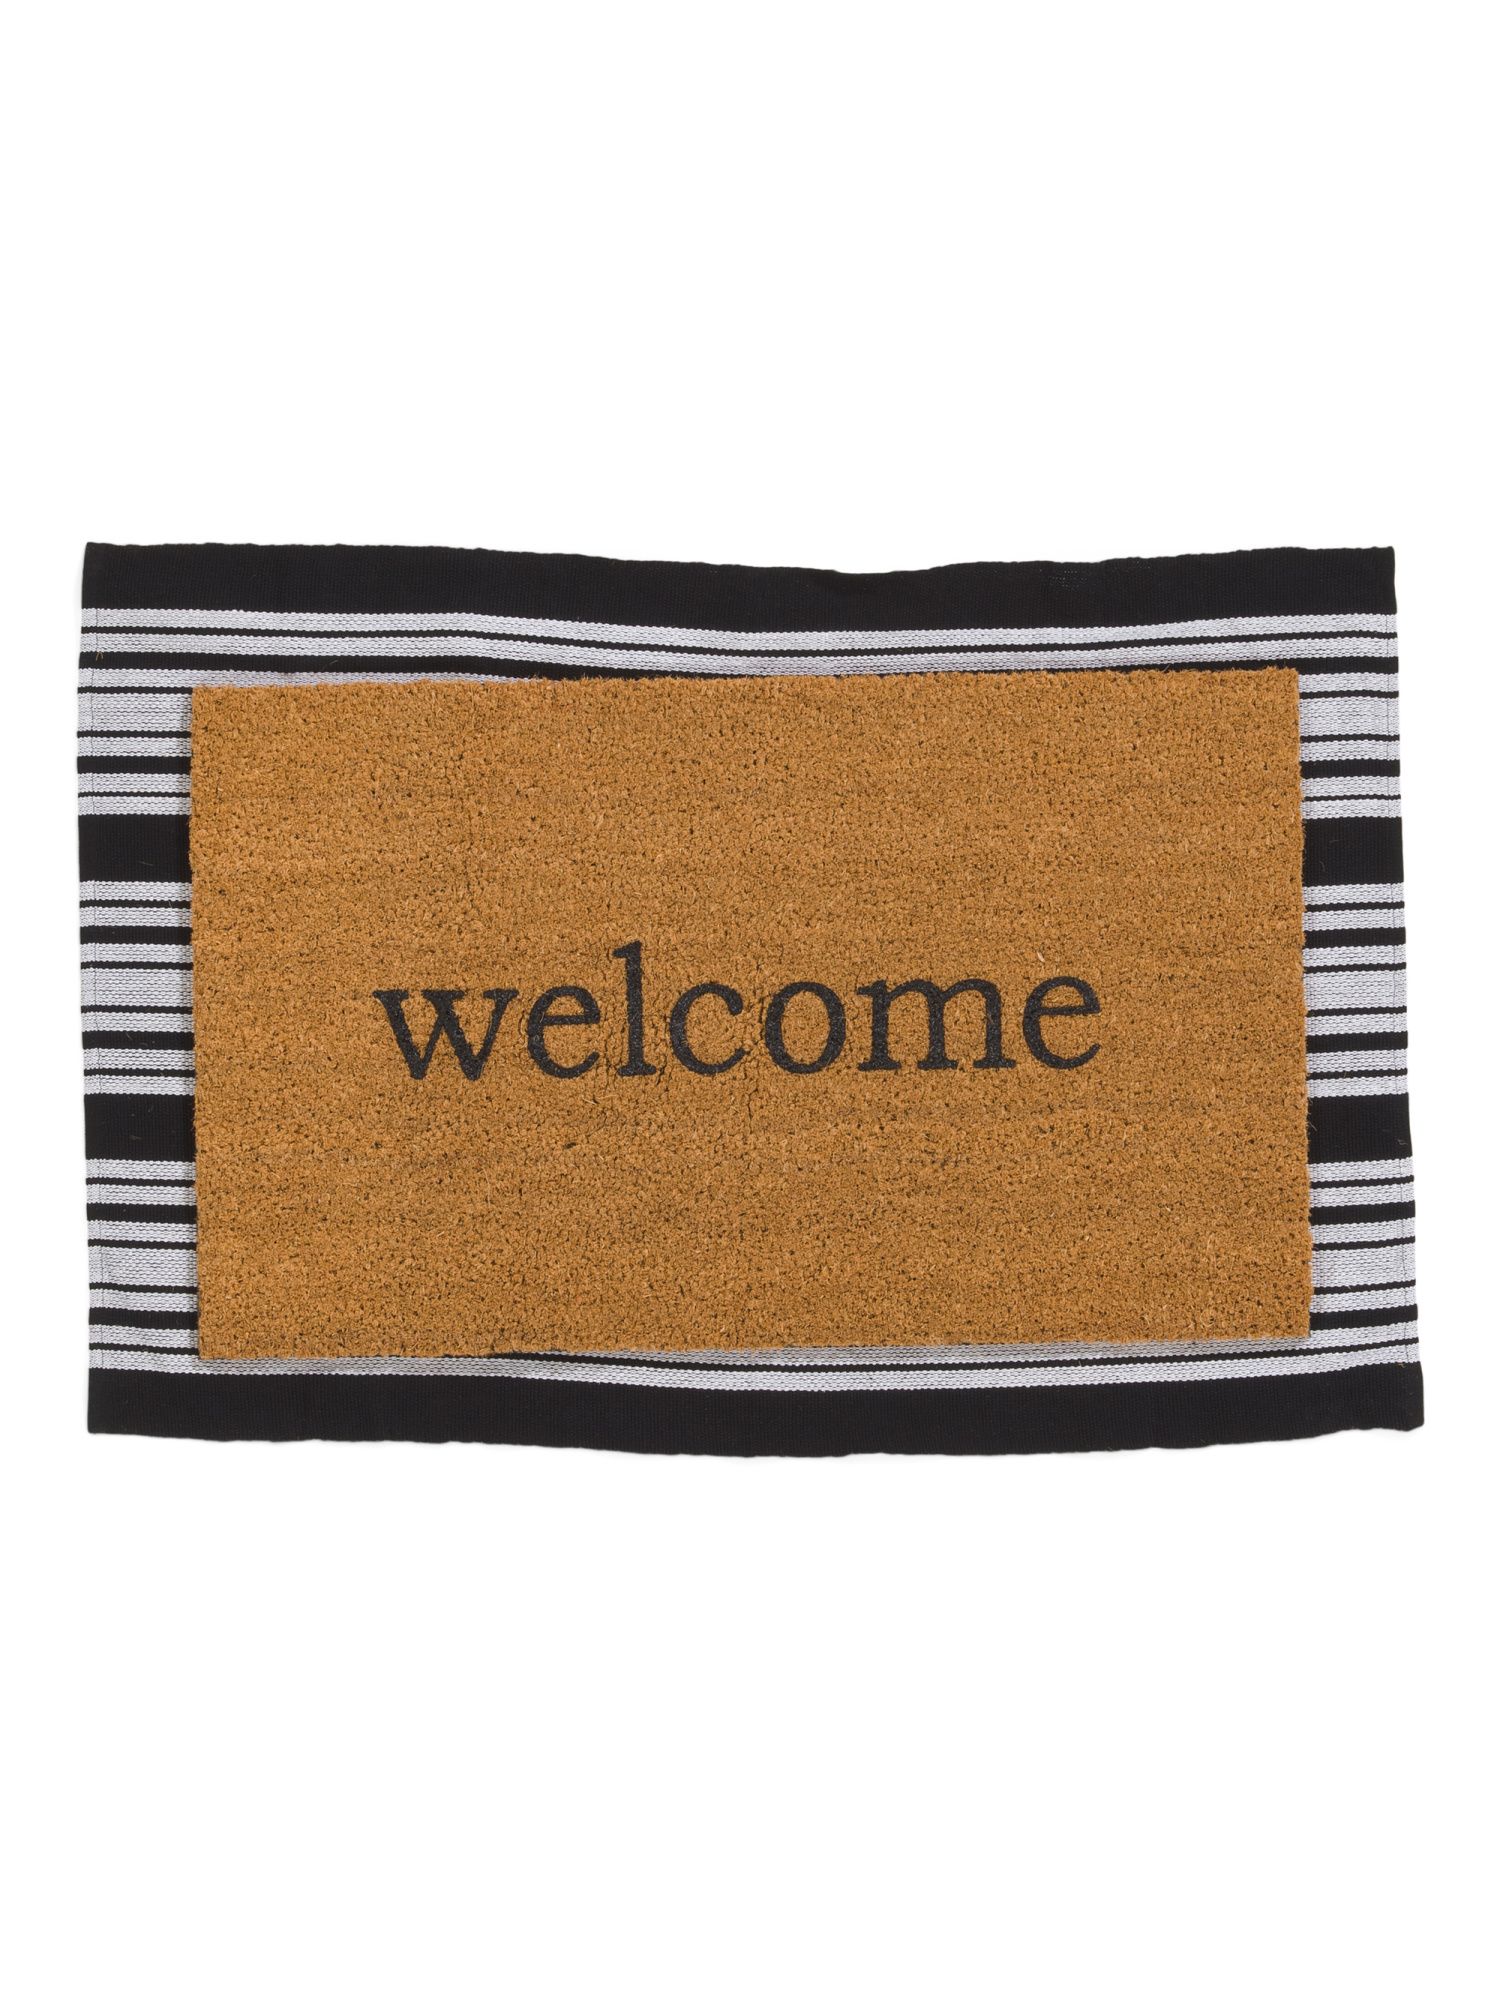 2pc Welcome Mat And Striped Scatter Rug | TJ Maxx